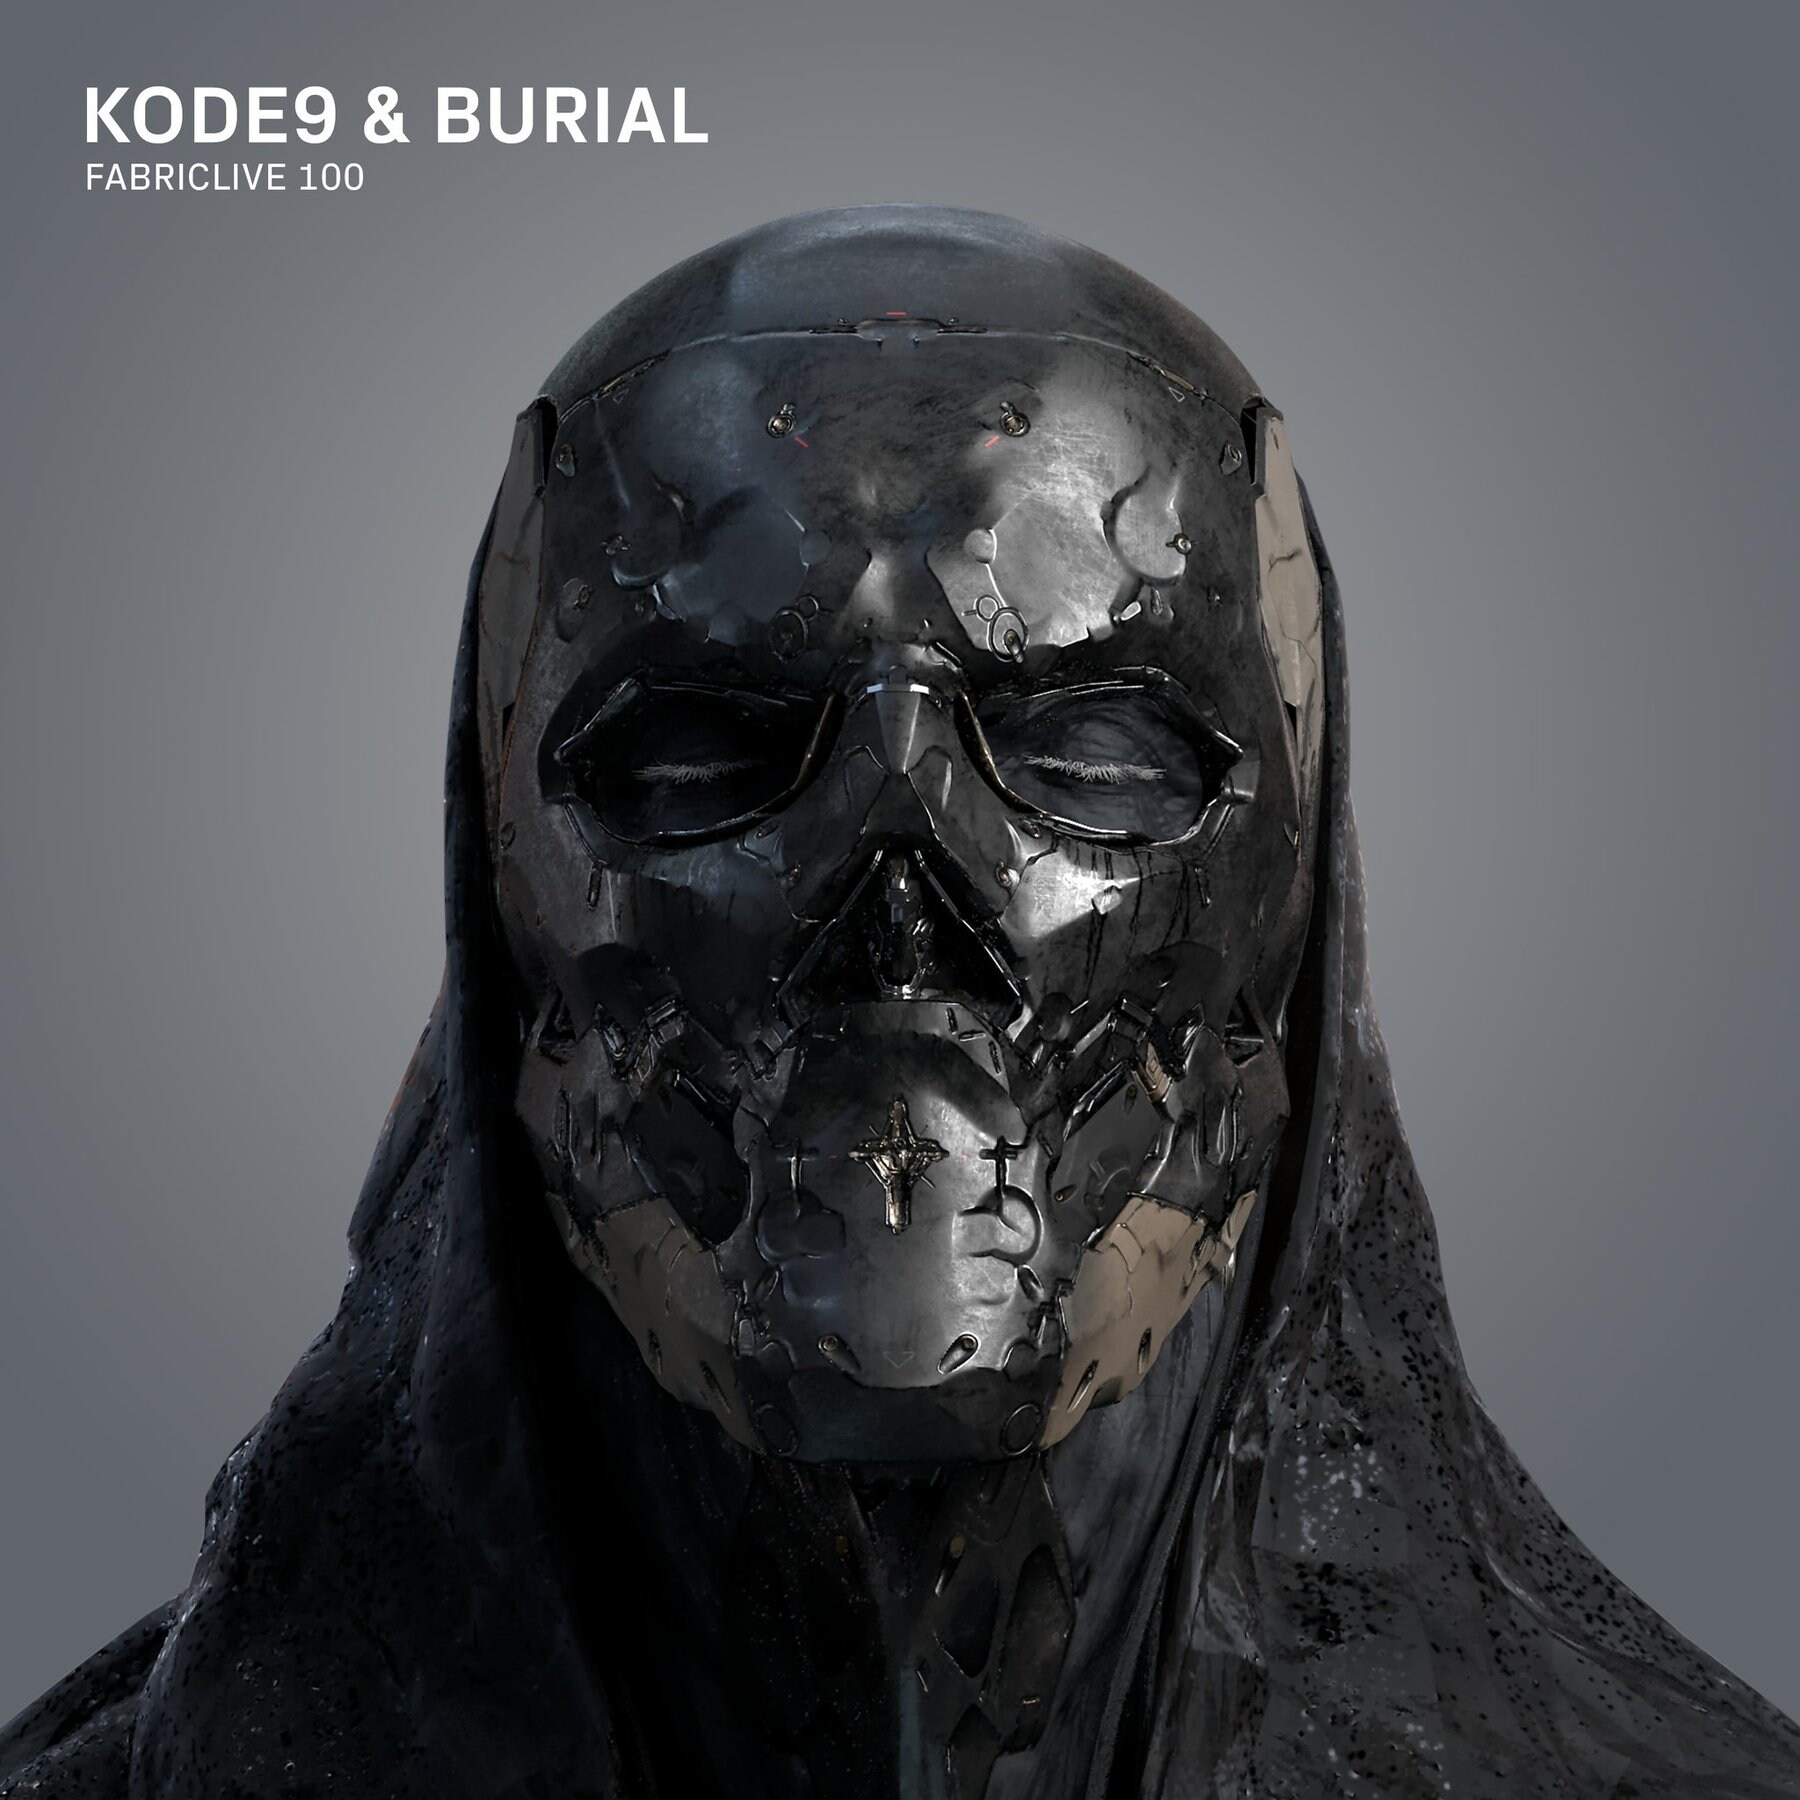 2. Kode9 &amp; Burial - FABRICLIVE 100